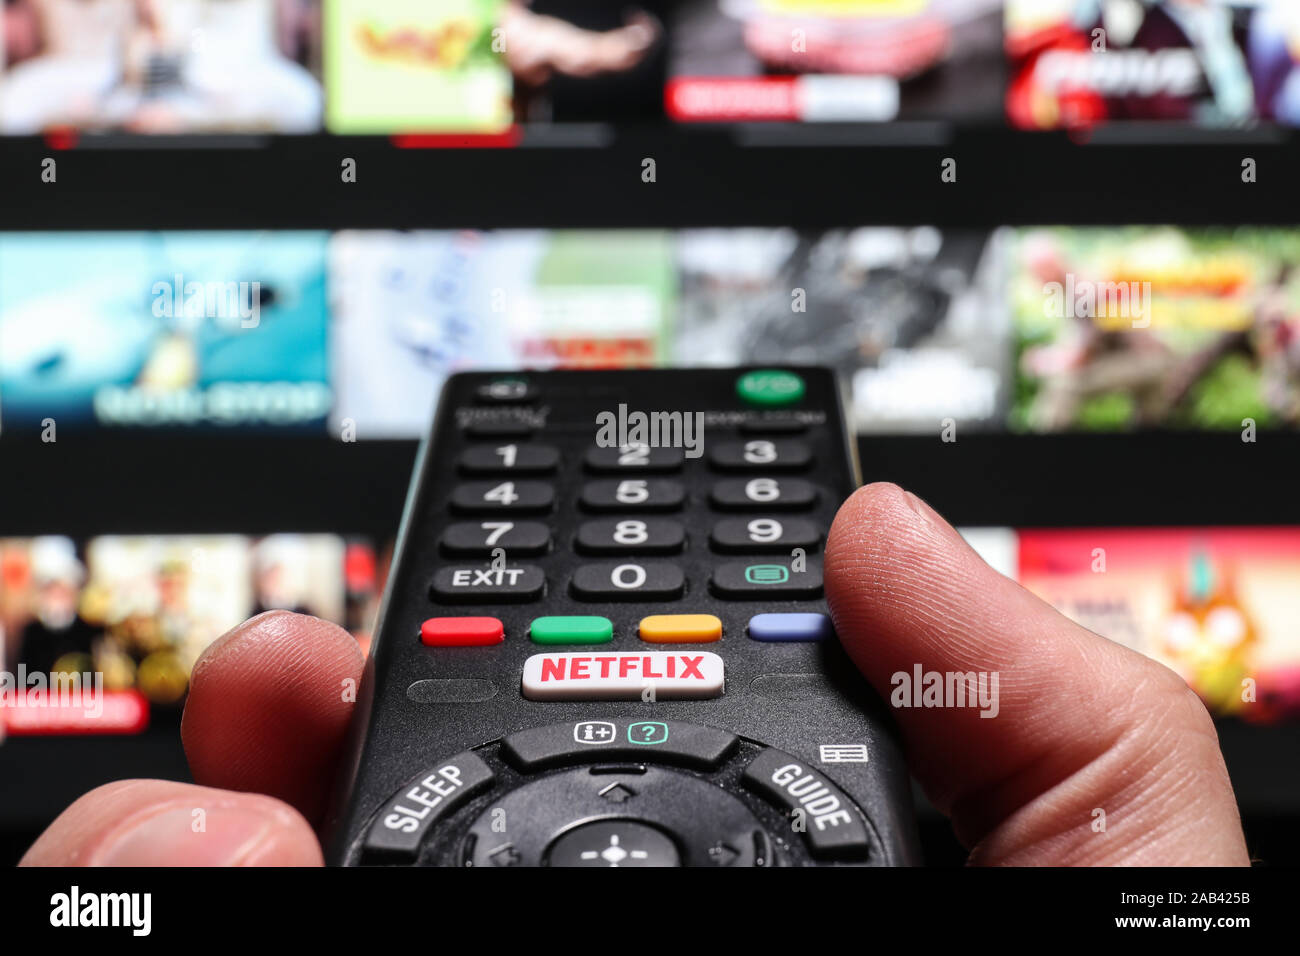 Watching Netflix on a smart Television using the Netflix button on a TV remote control Stock Photo